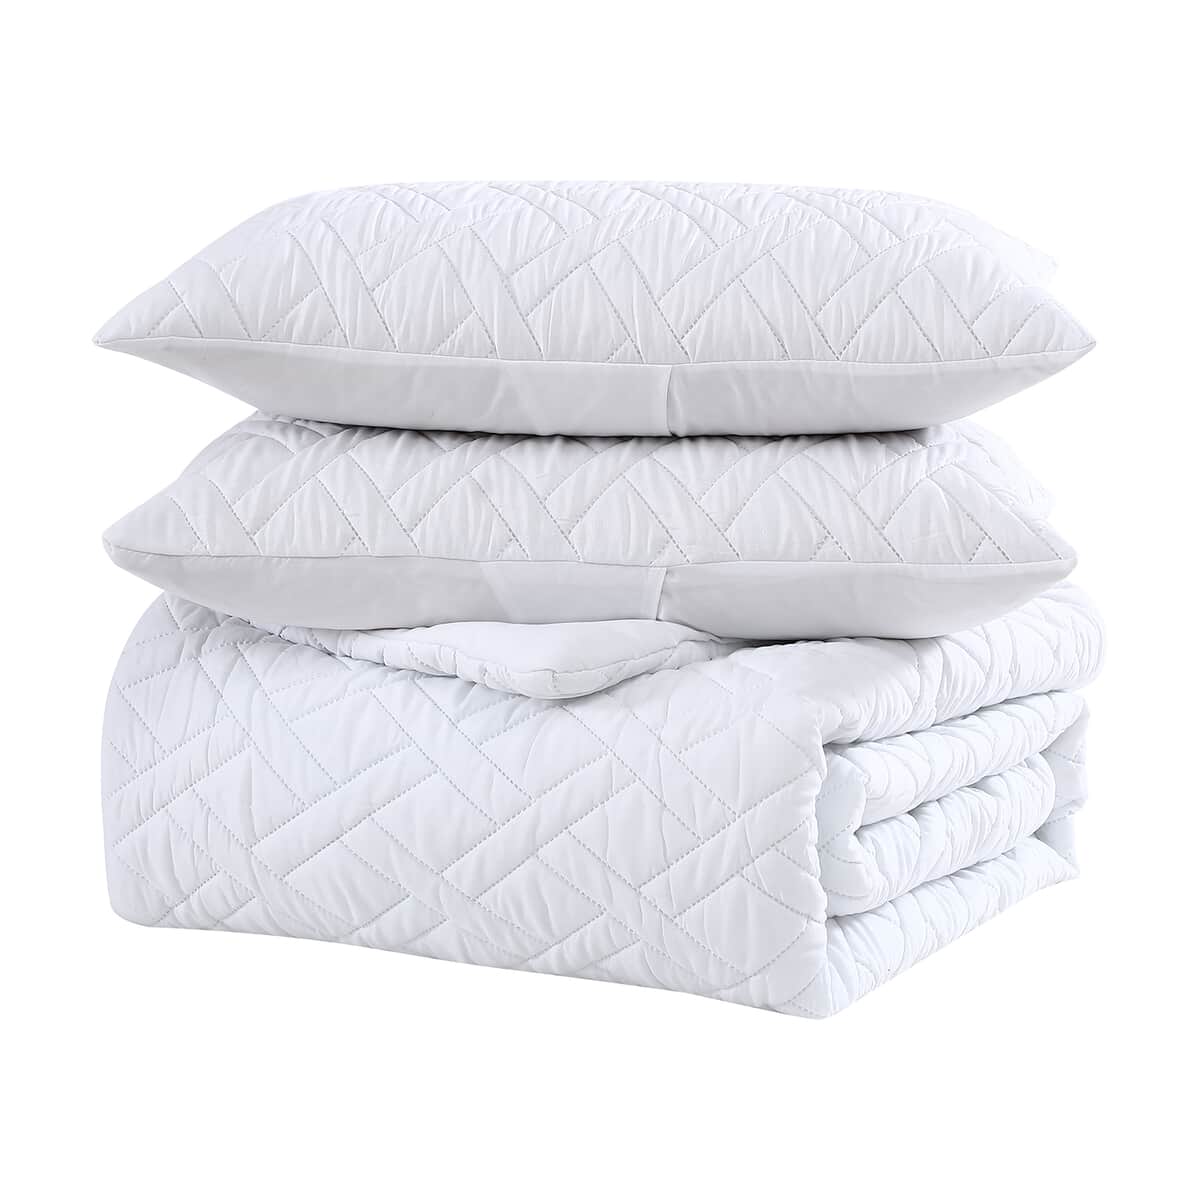 The Nesting Company- Larch 3 Piece Comforter Set - Queen (White) , Bed Comforters , Polyester Comforter , Bedding Sets , Quilt Set image number 4